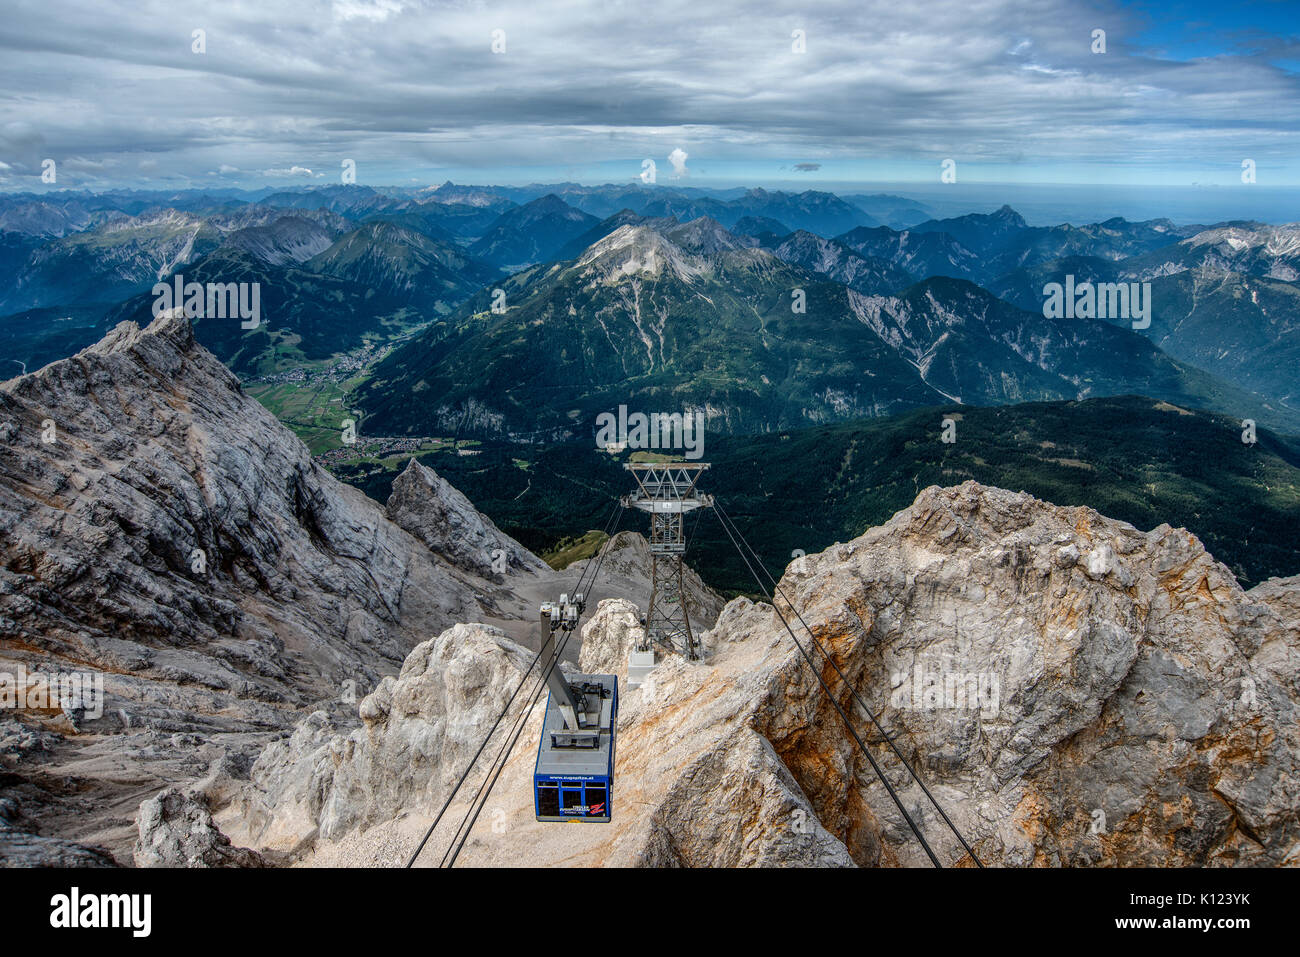 The Tyrolean Zugspitze Cable Car arrives at the summit of the Zugspitze mountain on the German-Austrian border. Stock Photo